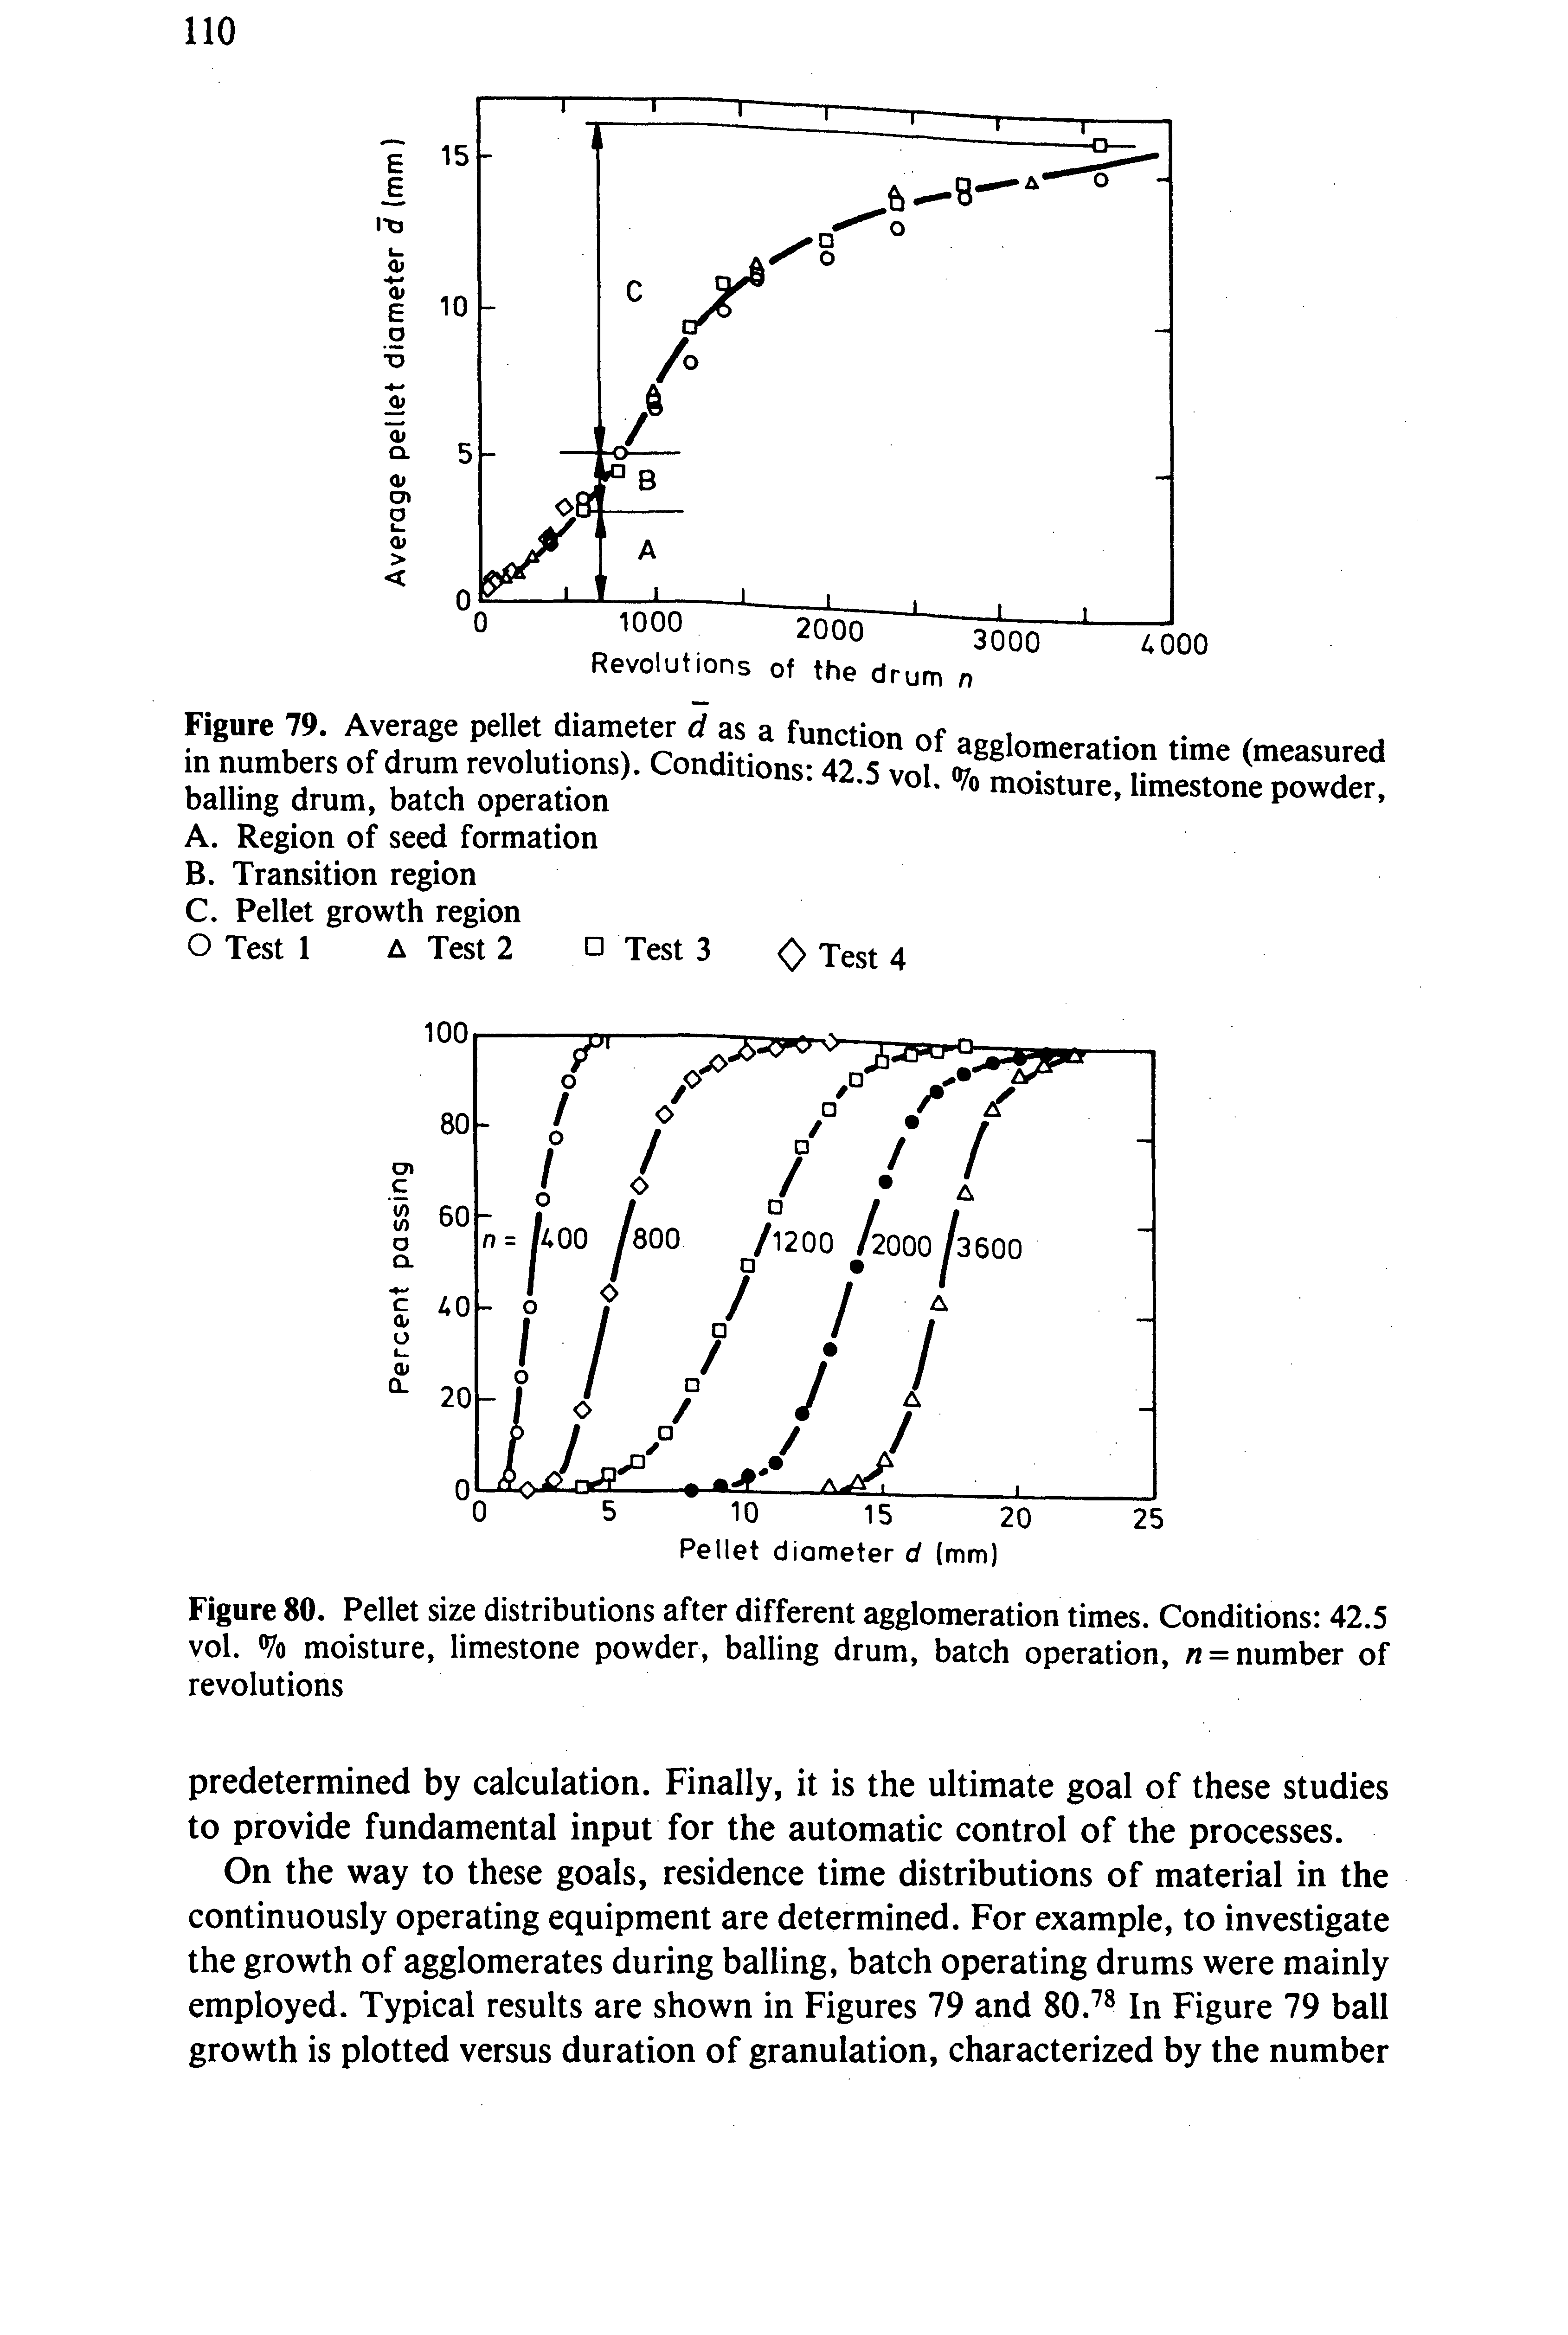 Figure 79. Average pellet diameter d as a function of agglomeration time (measured in numbers of drum revolutions). Conditions 42.5 vol. % moisture, limestoiJe powder balling drum, batch operation ...